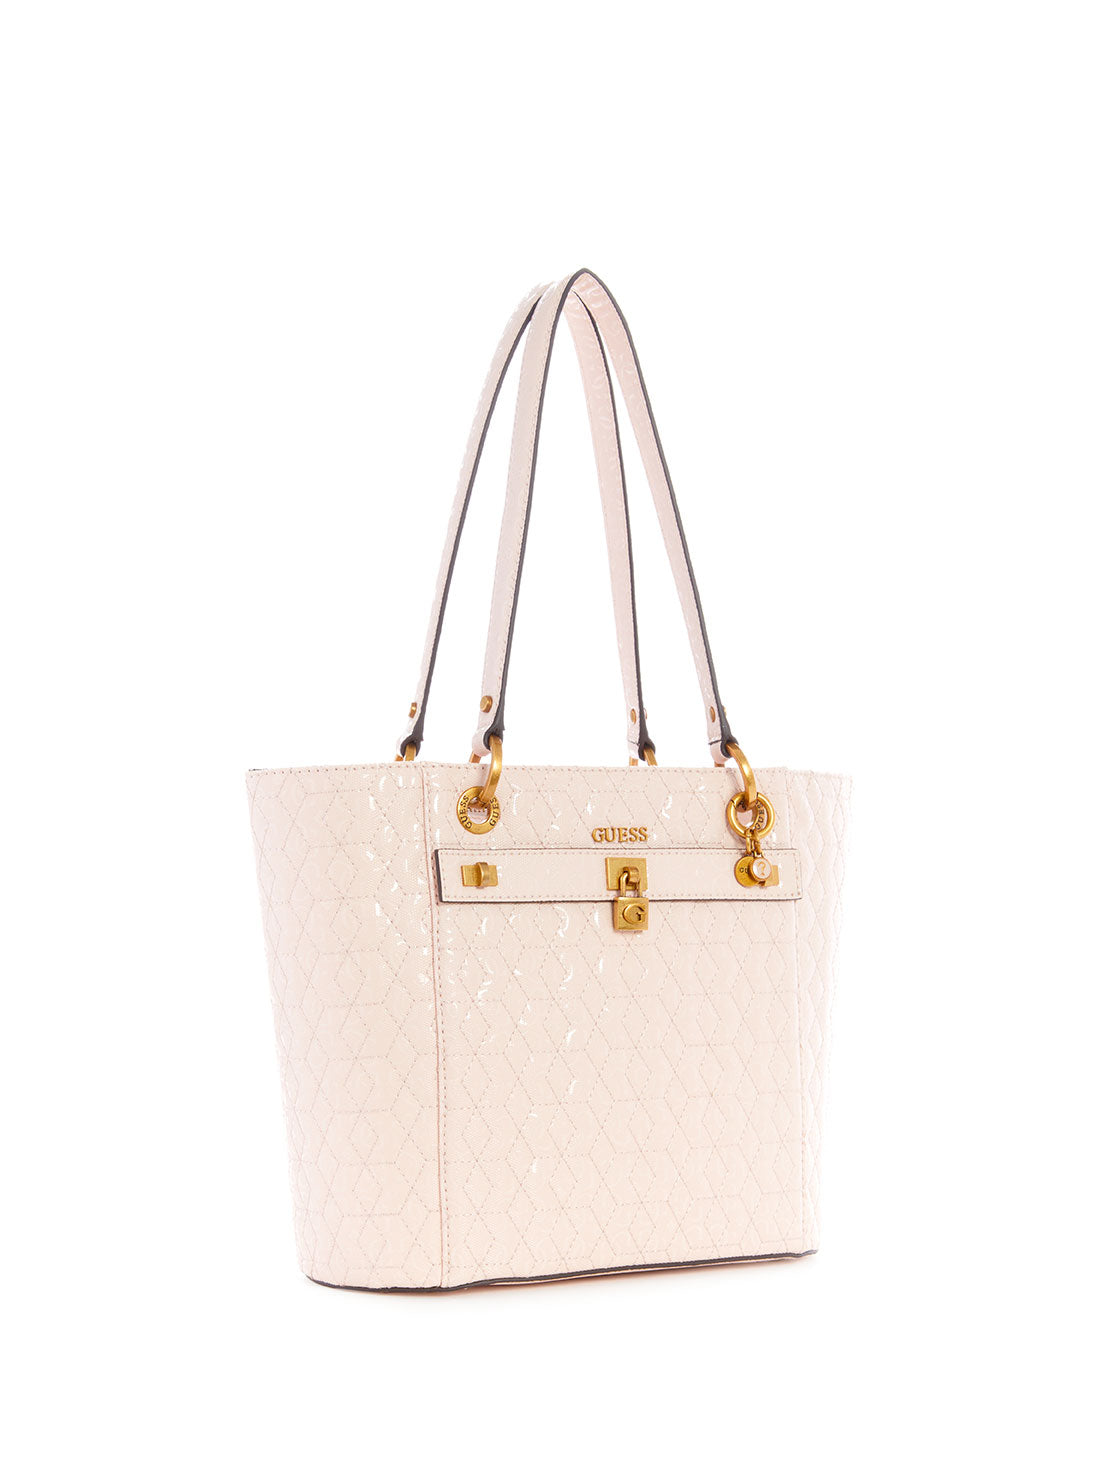 GUESS Womens Shell White Noelle Small Elite Tote Bag GI787922 Side View